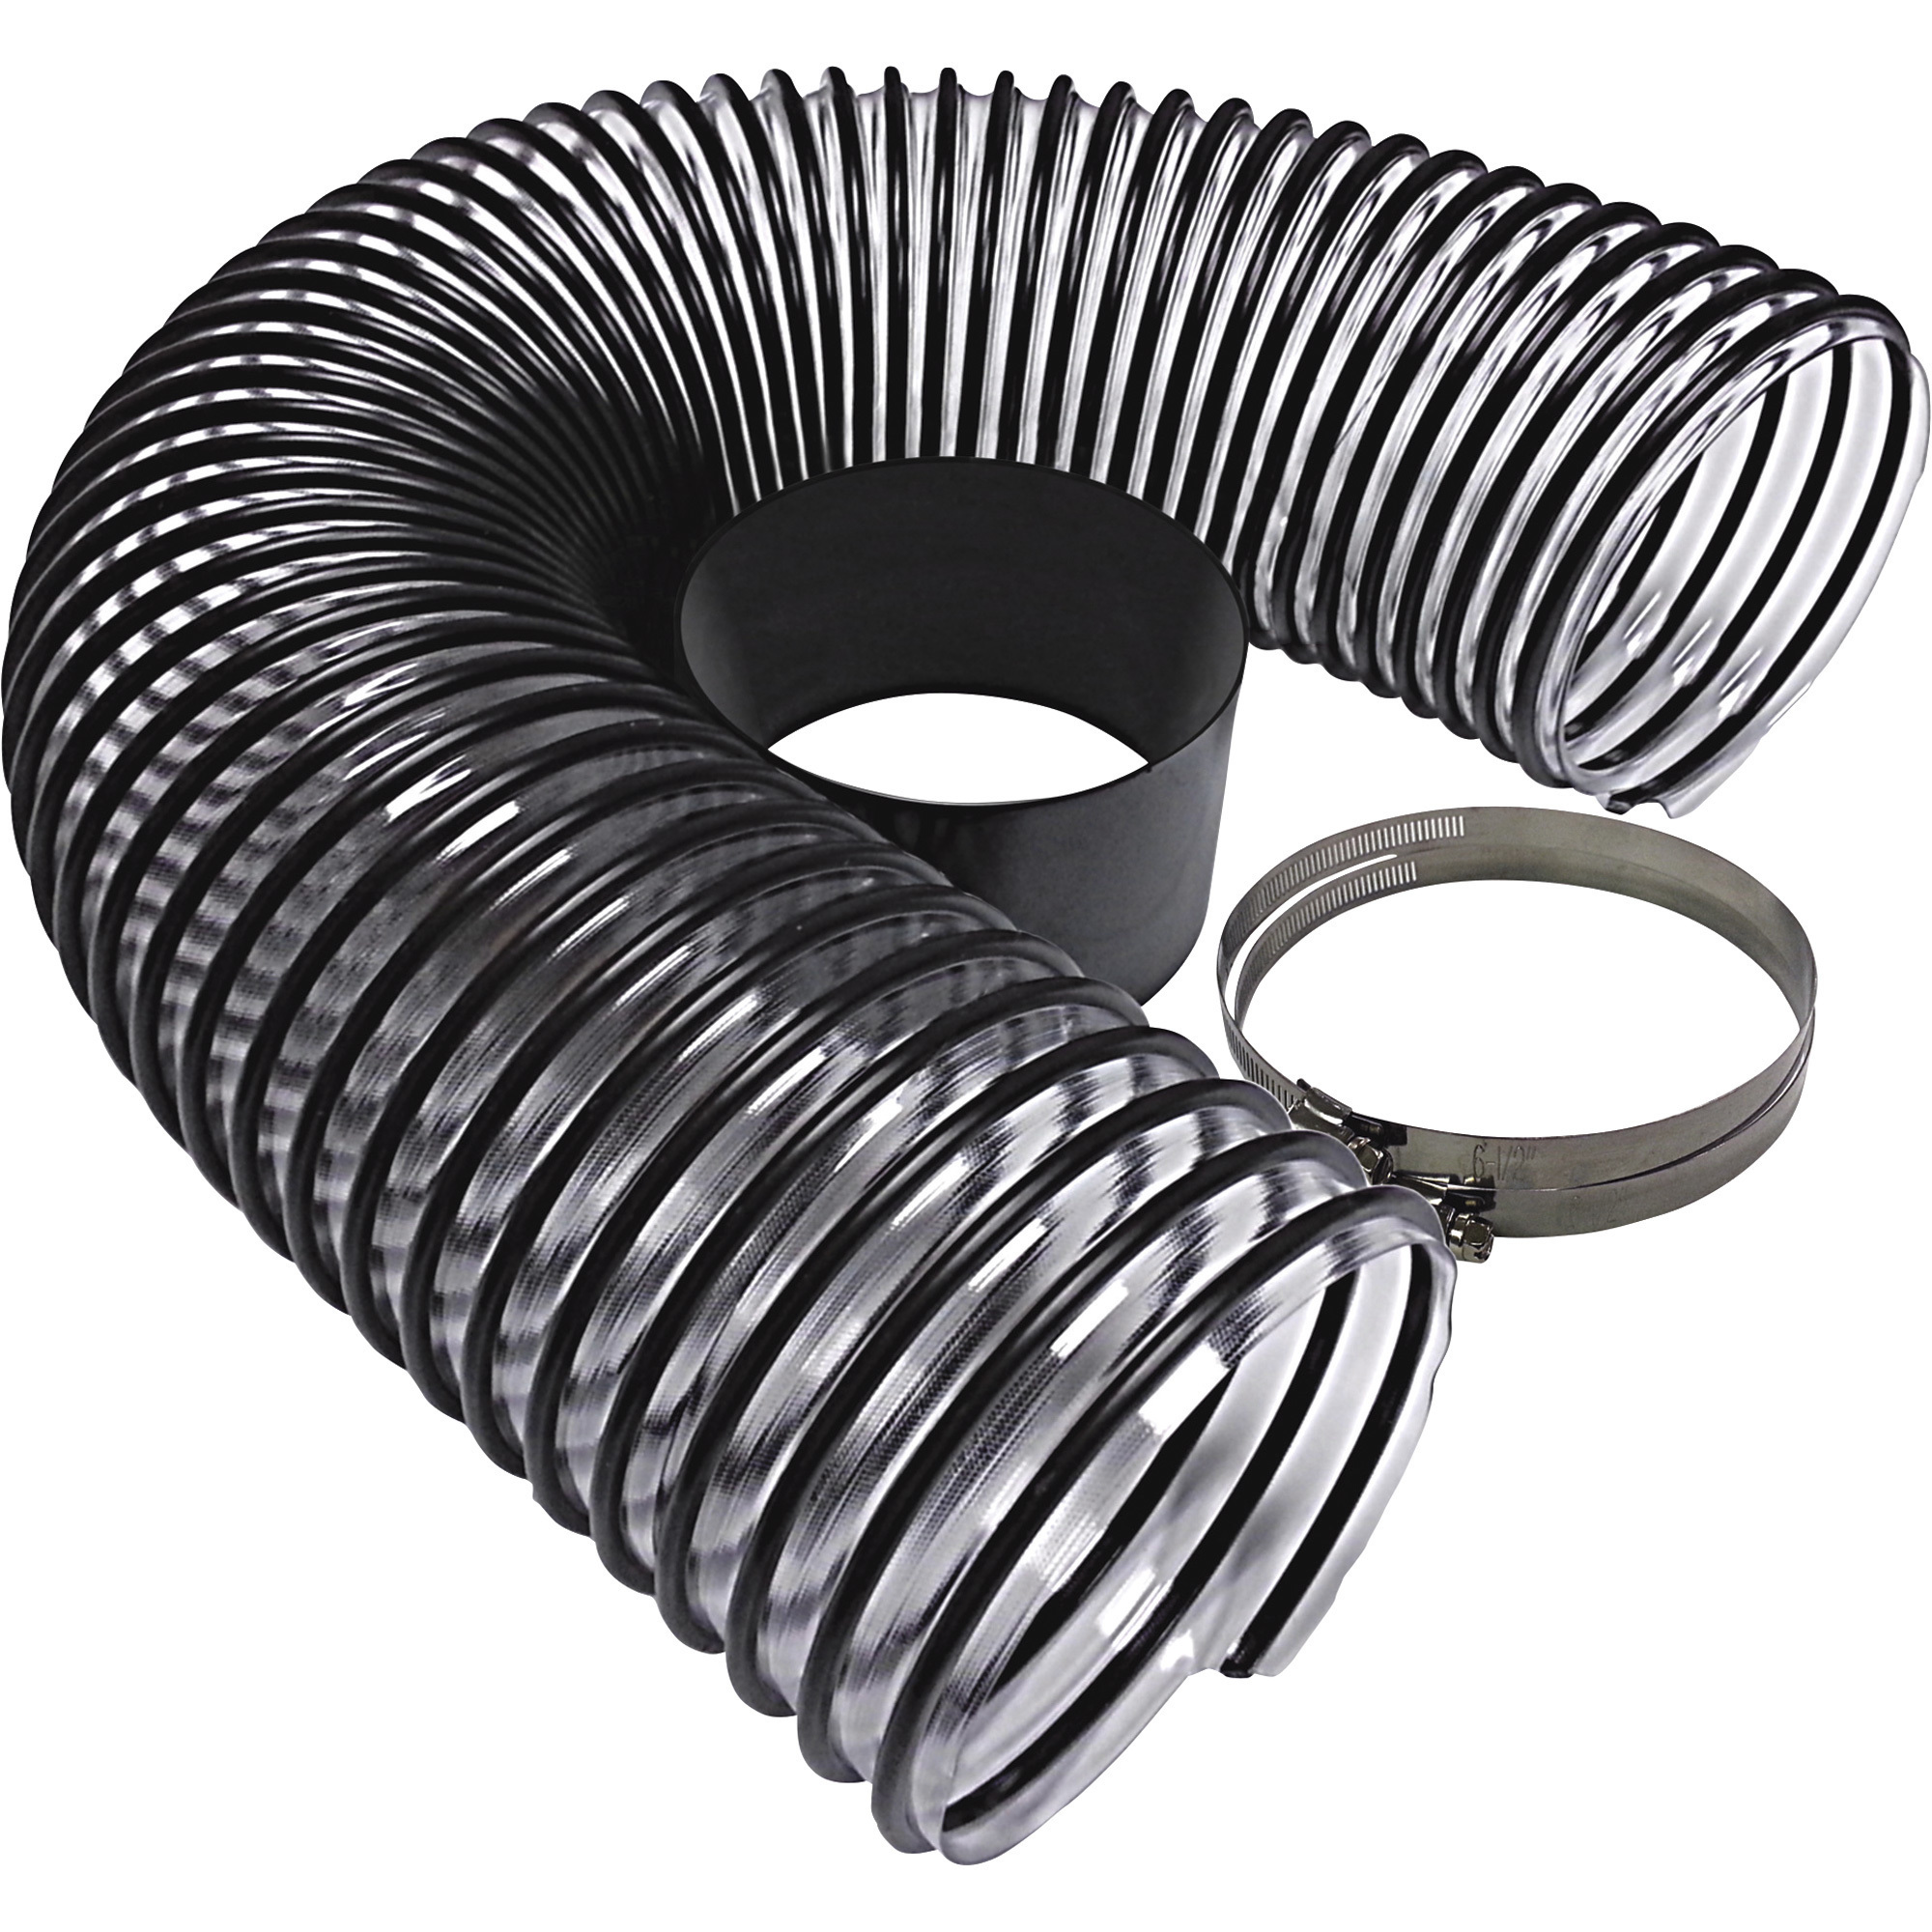 Vacuum Hose Extension Kit for Zero-Turn Mowers — Works with Item#s 250500 and 250501, Model -VK - Agri-Fab 65640